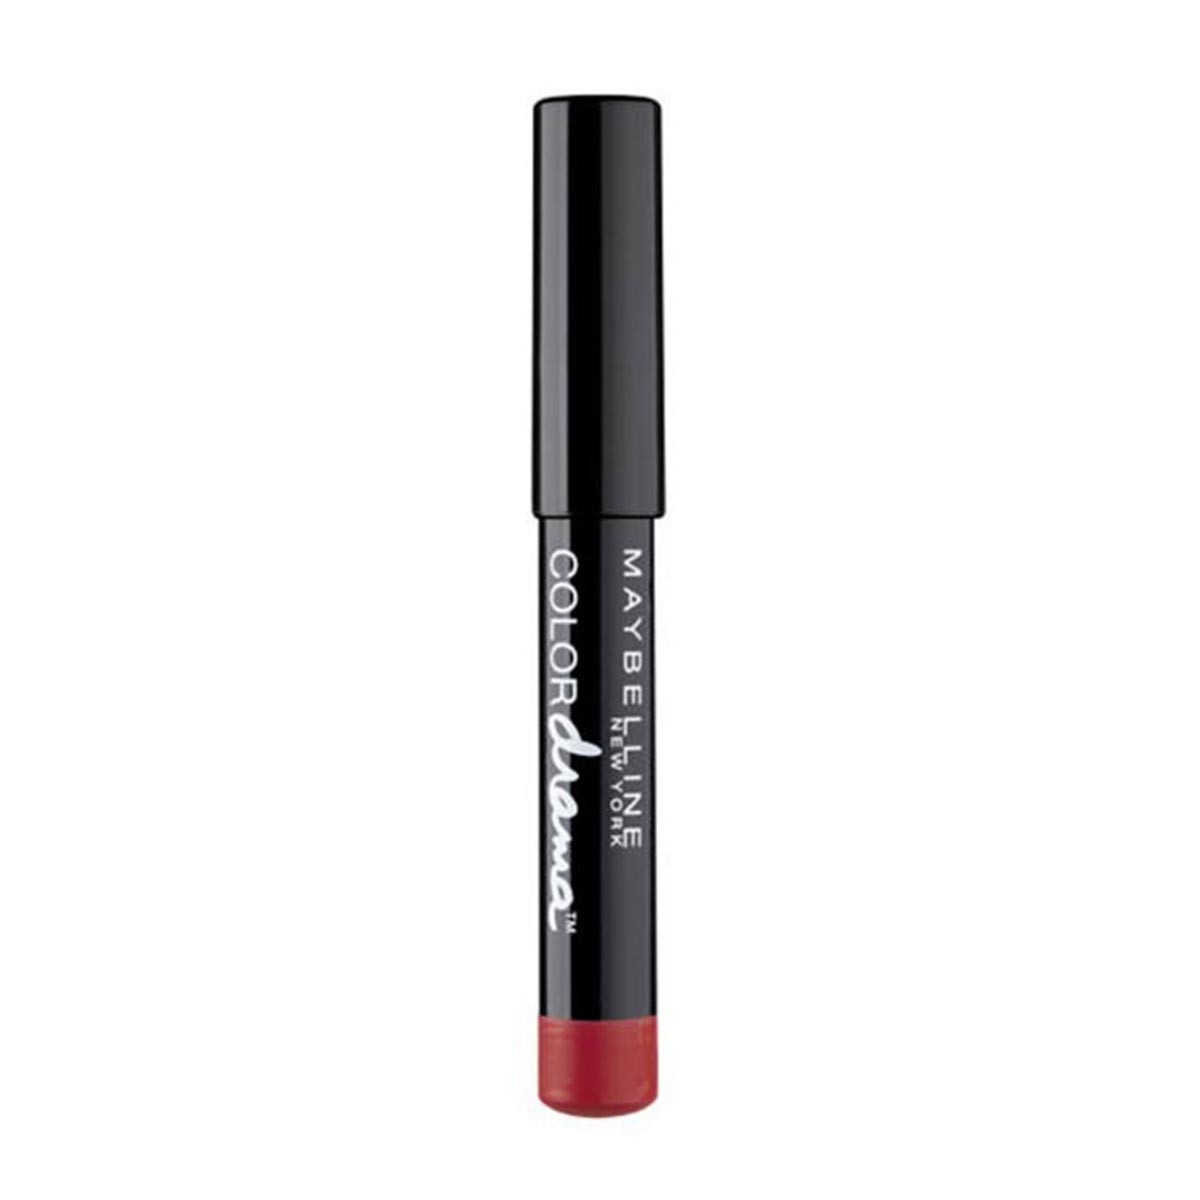 maybelline-lip-color-drama-510-red-essential